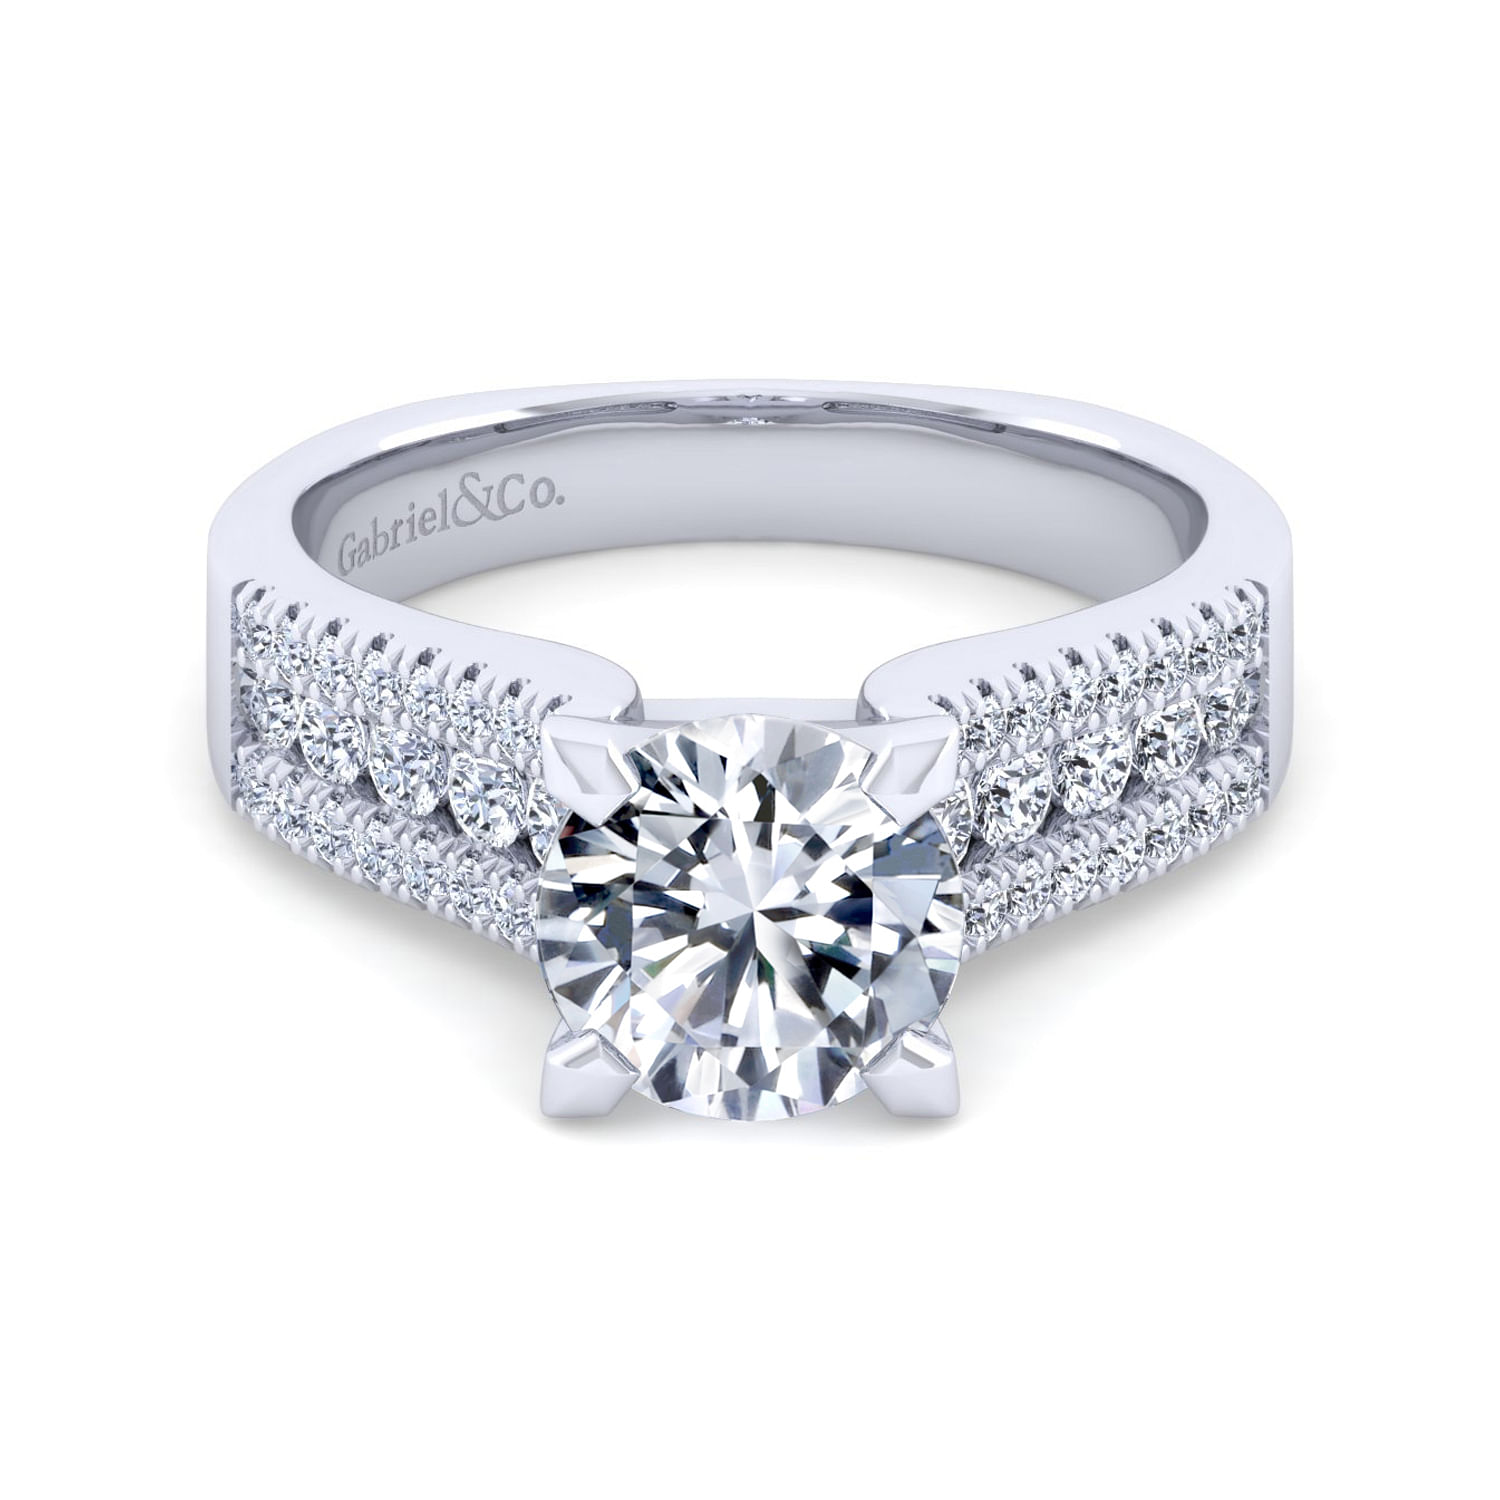 Gabriel - 14K White Gold Wide Band Round Diamond Channel Set Engagement Ring